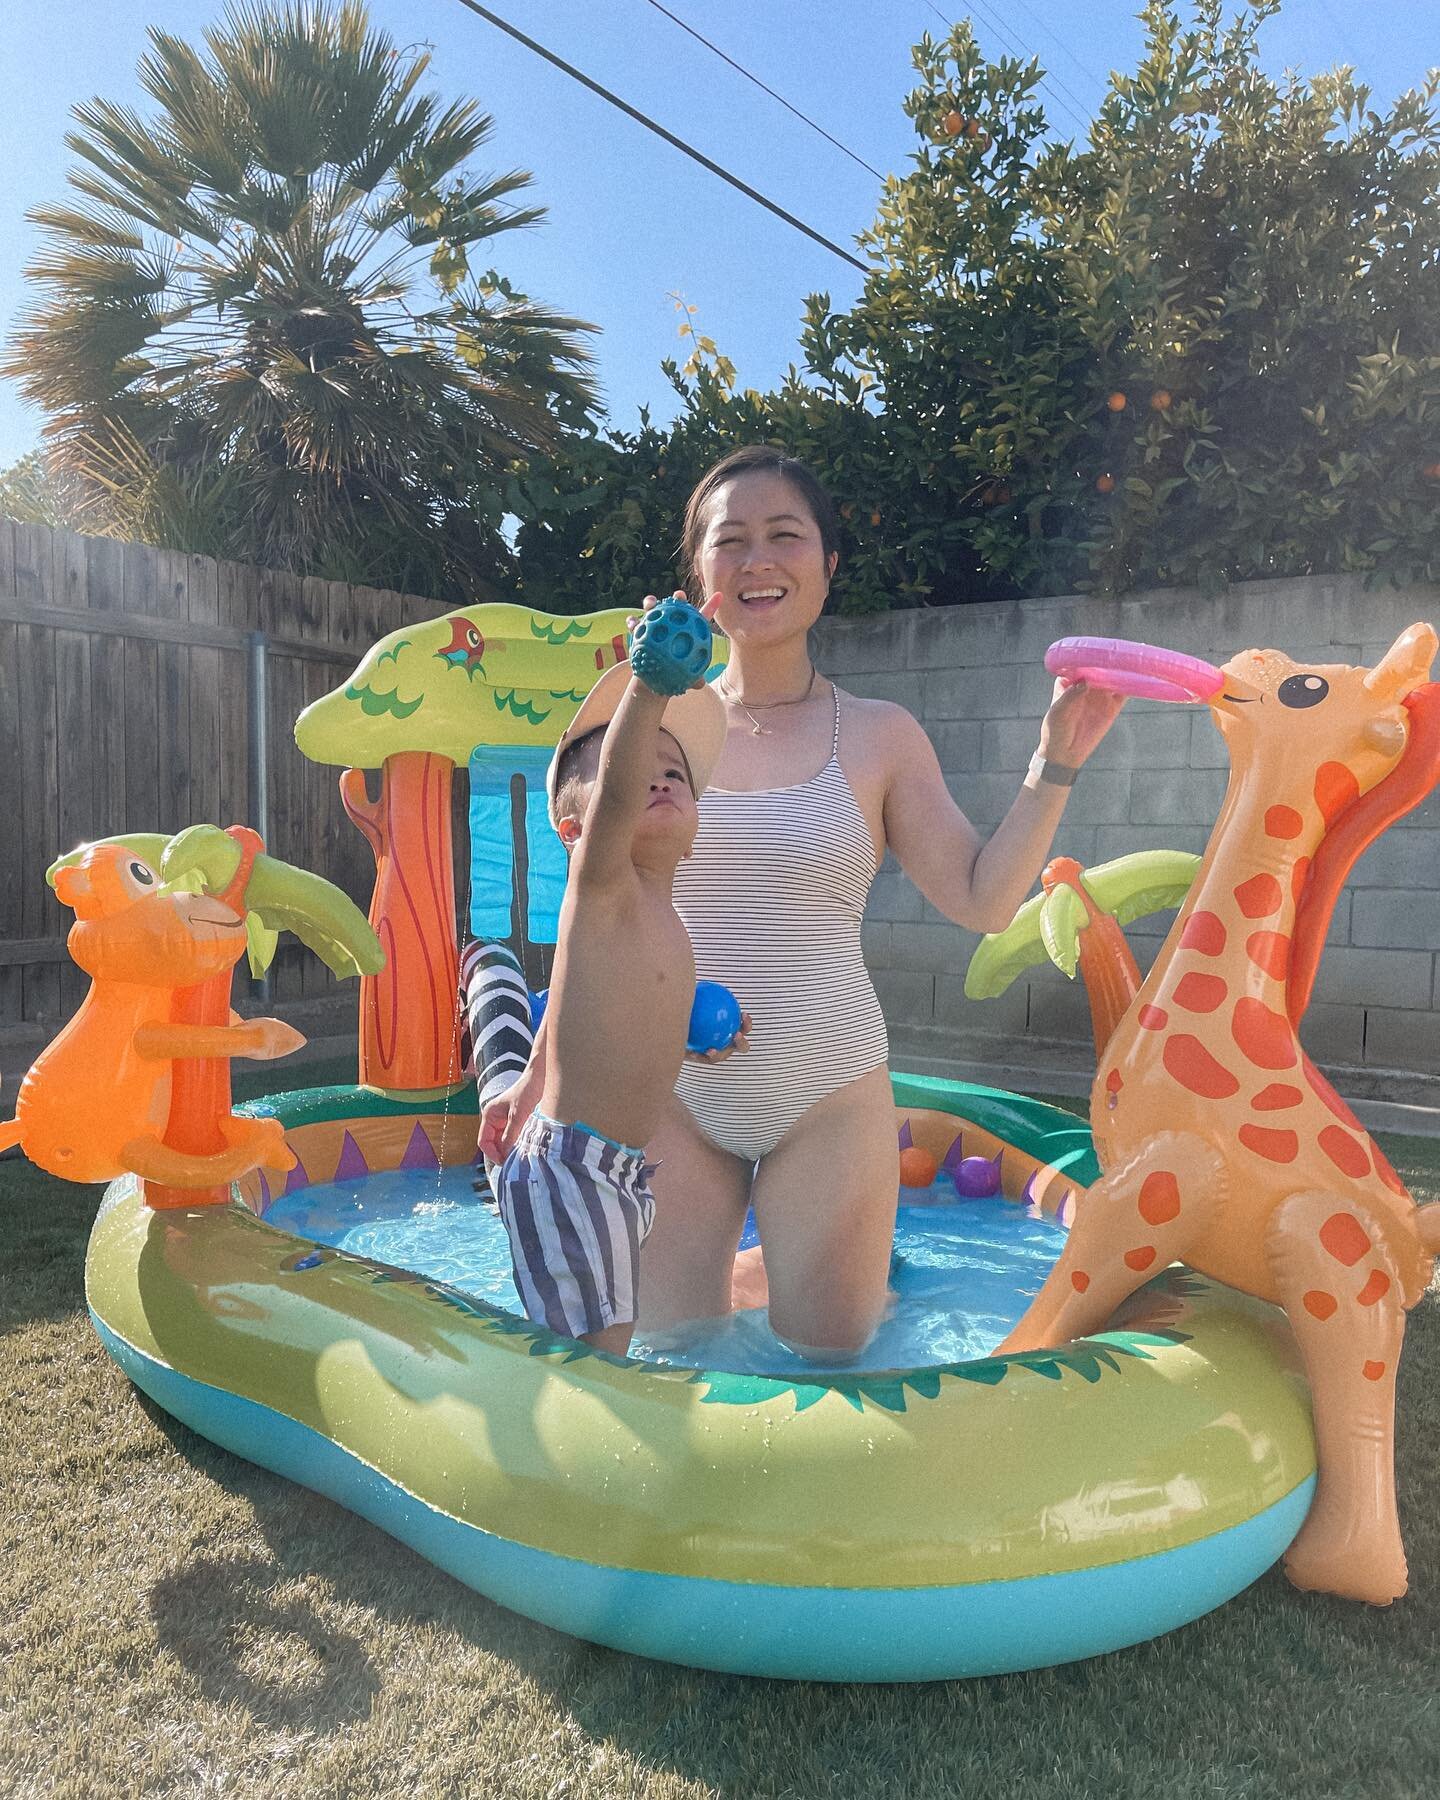 #memorialdayweekend photodump. 

Really took advantage of the warm weather and turned our yard into a water park. Charlie had a blast splashing around. 

A few other highlights include:
- BTS lunch date with @istehfunny 
- Charlie&rsquo;s first socce